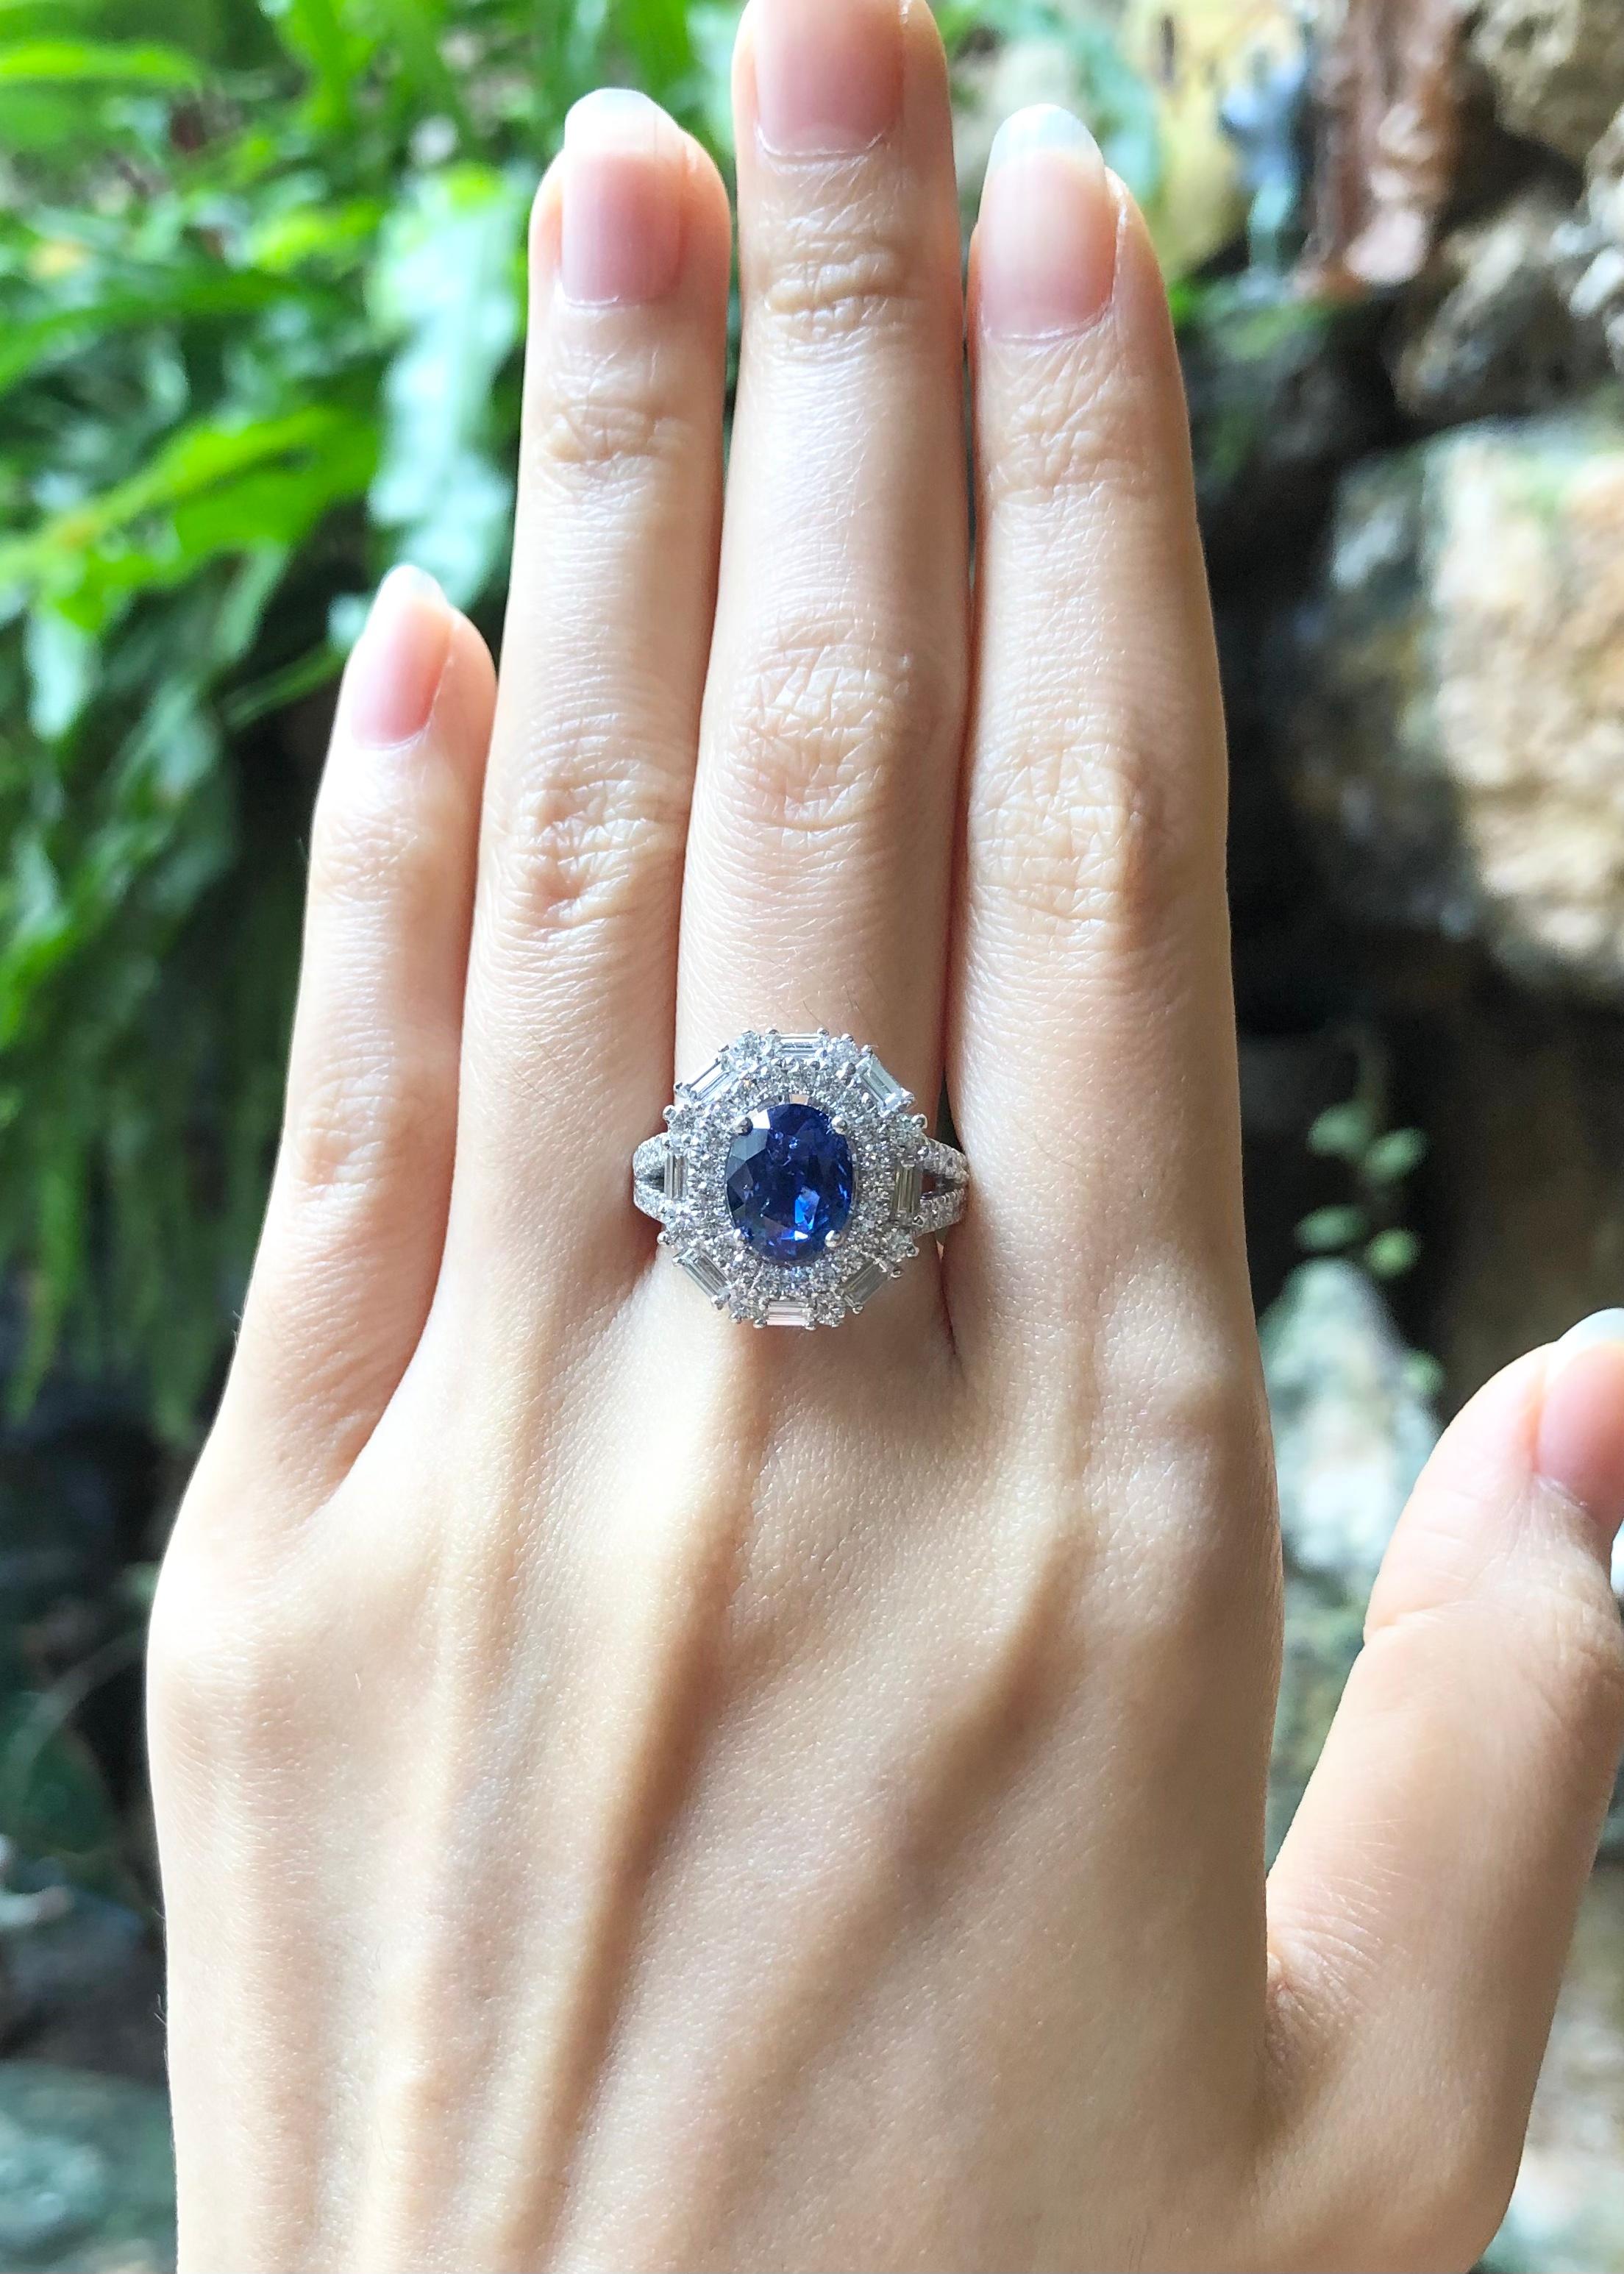 Blue Sapphire 2.50 carats with Diamond 1.28 carats Ring set in 18 Karat White Gold Settings

Width:  1.5 cm 
Length: 1.6 cm
Ring Size: 54
Total Weight: 10.58 grams



